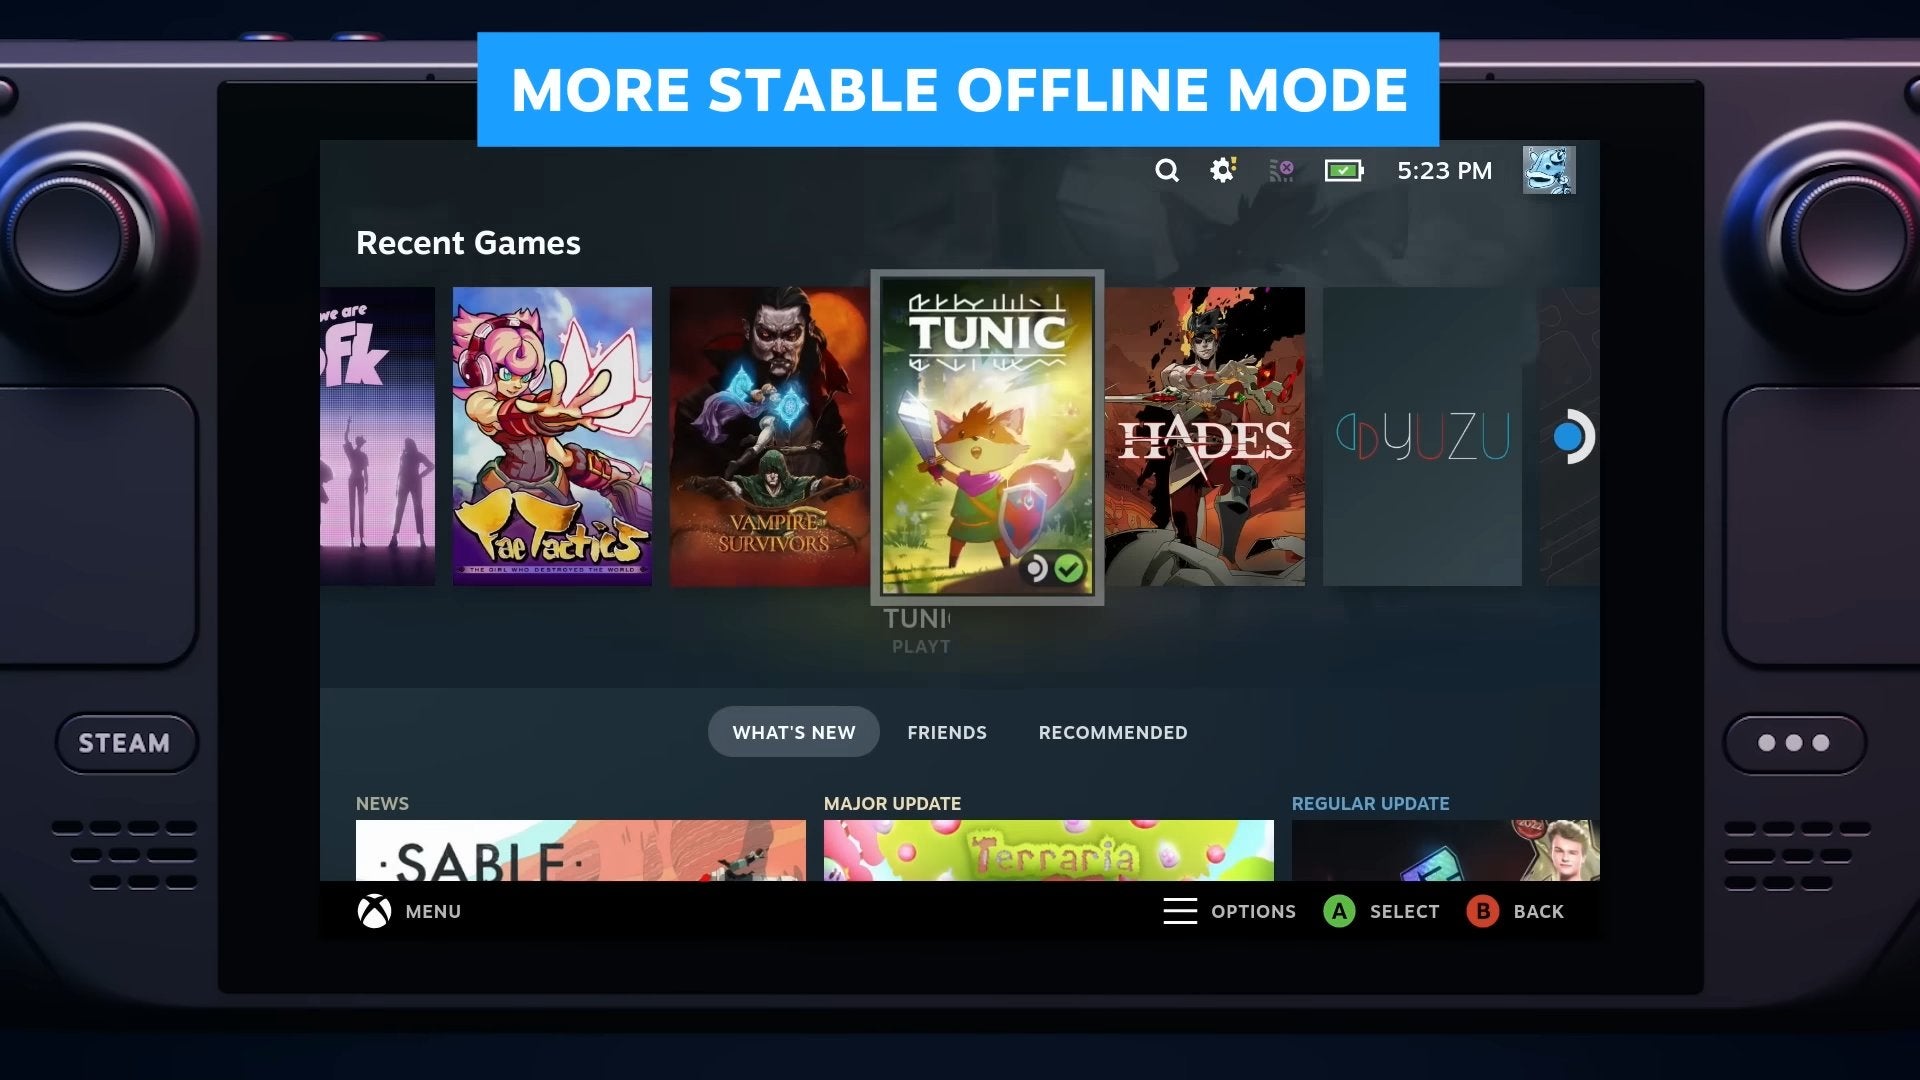 A screenshot from a Steam Deck trailer showing a game library with the Yuzu Nintendo Switch emulator icon visible.